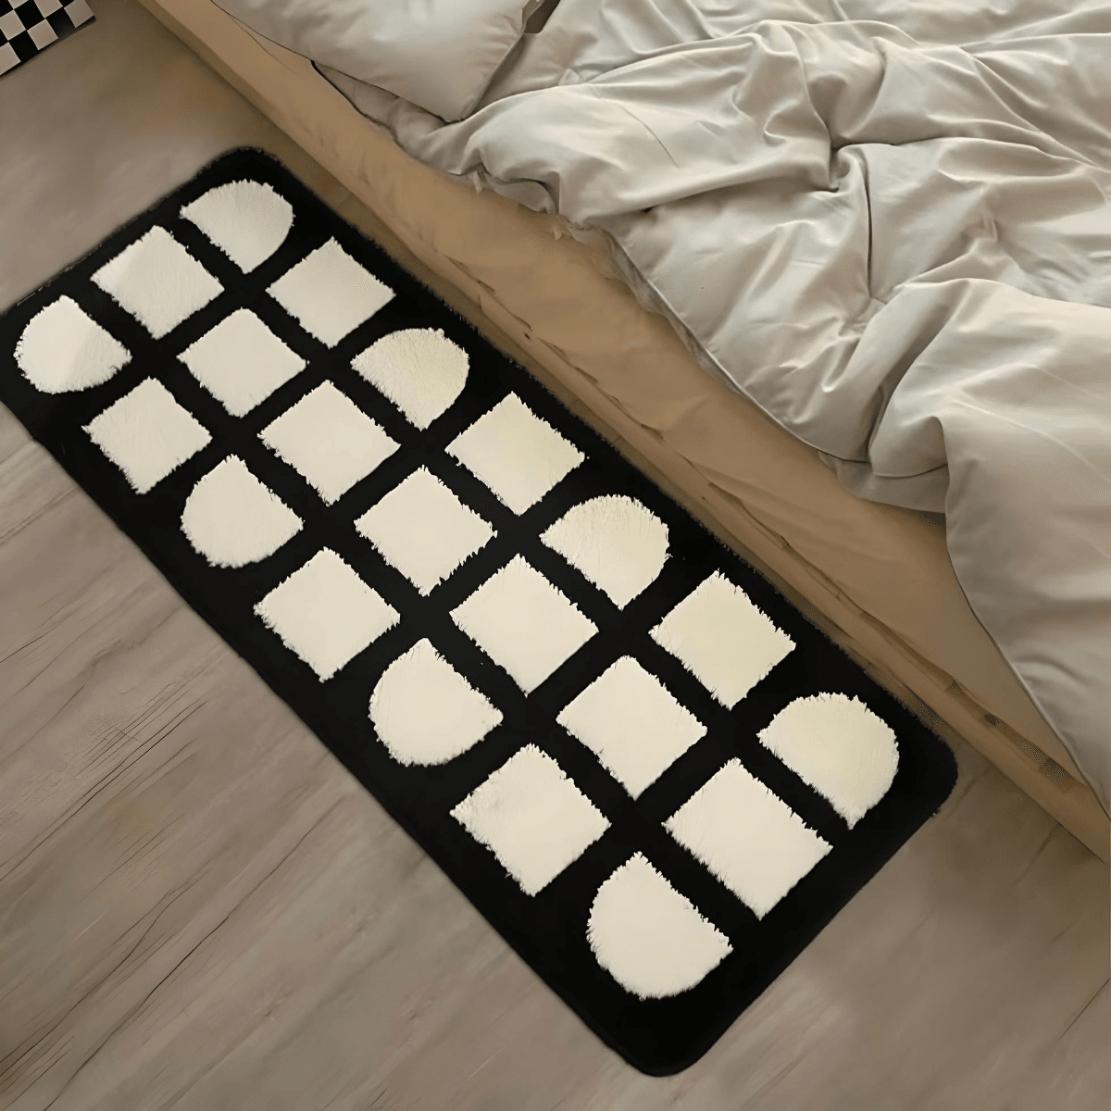 A bedside floor rug with a black and white geometrical design